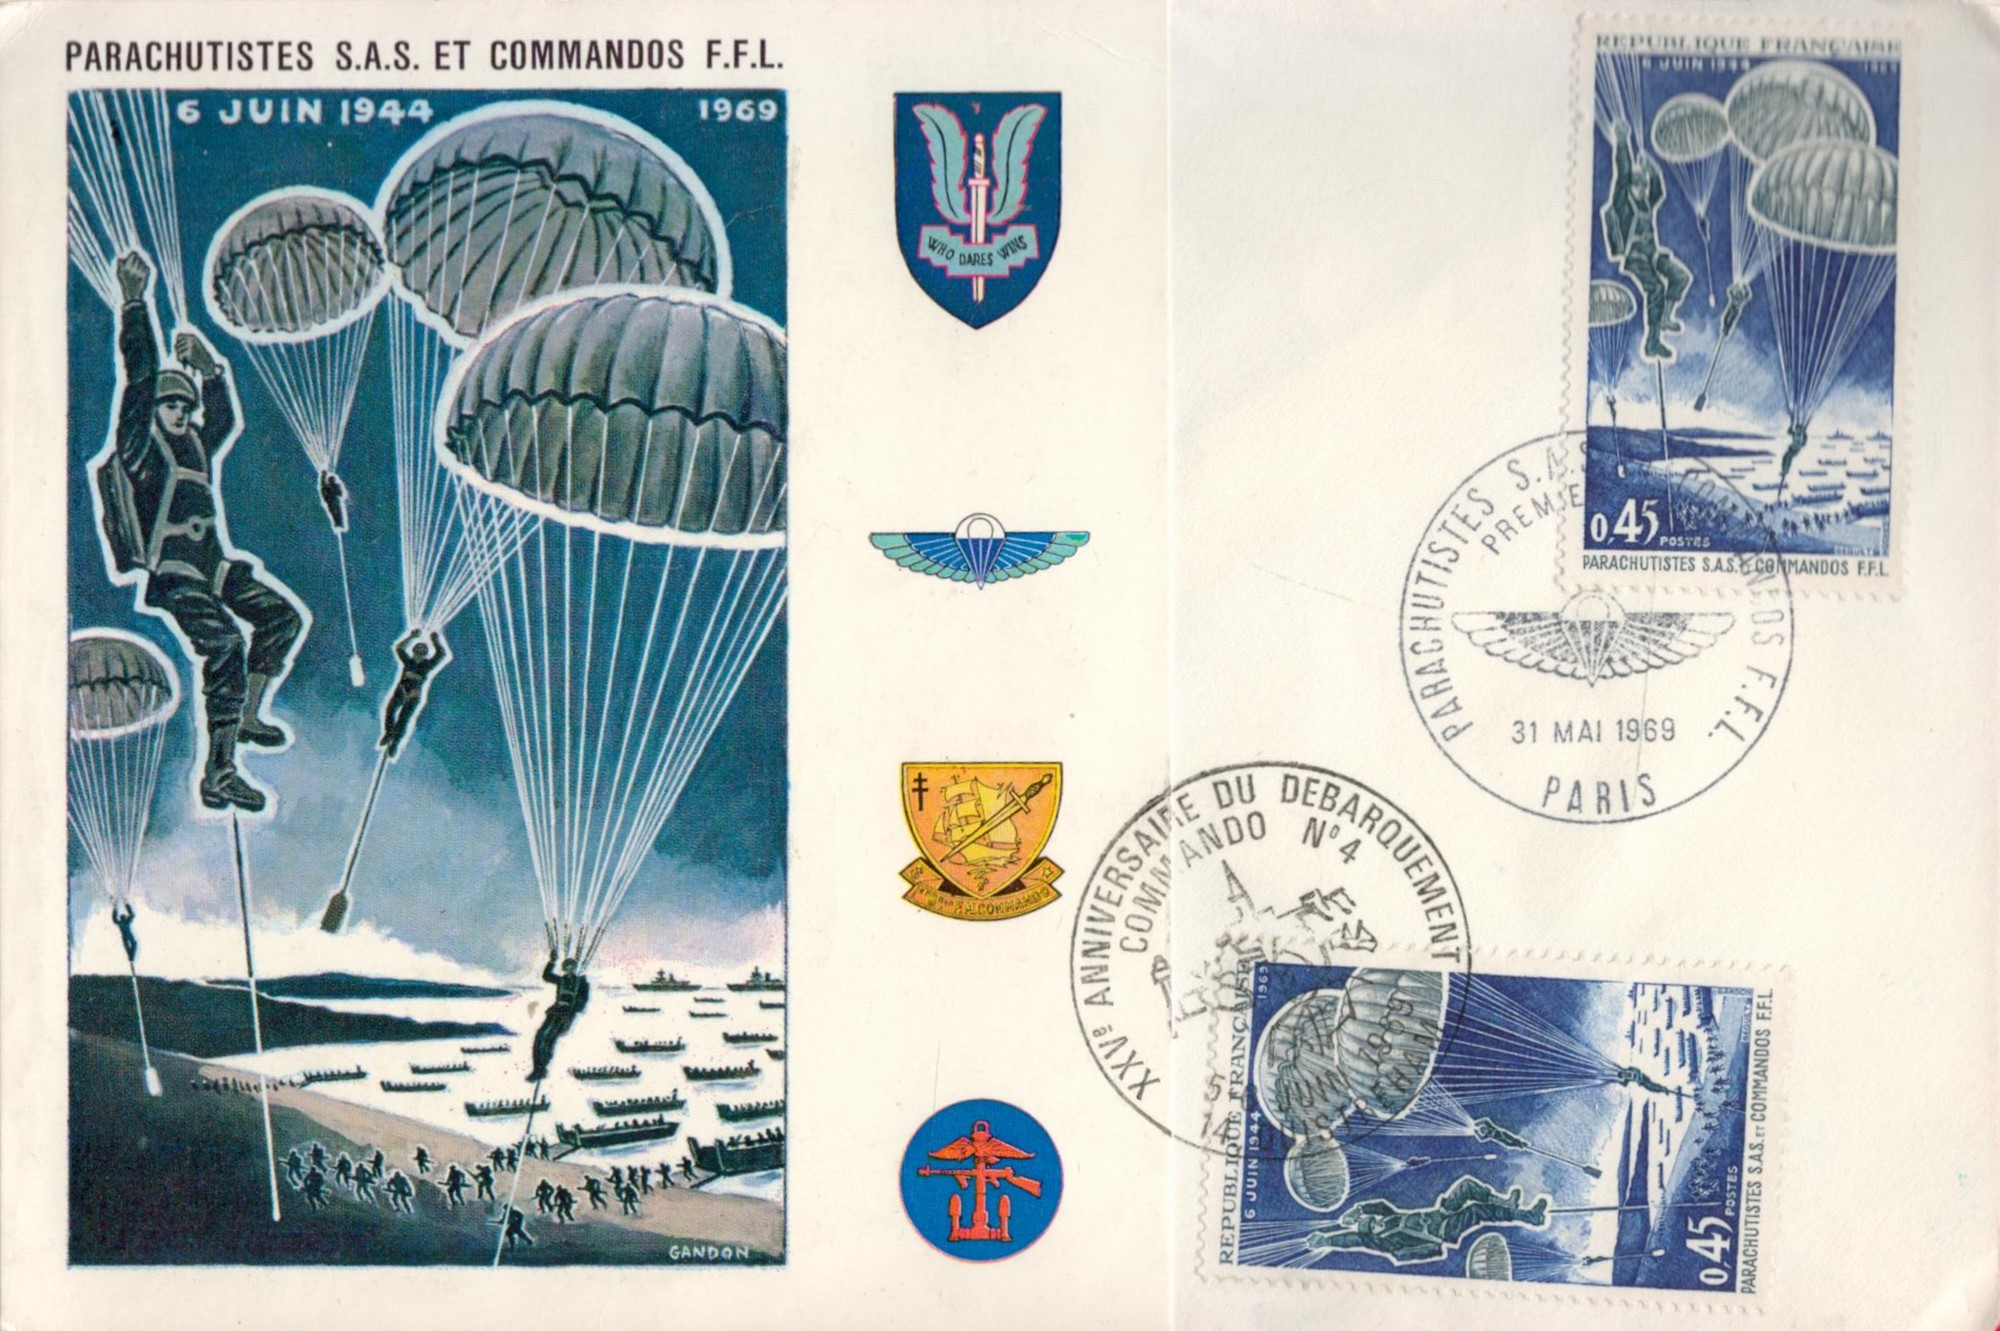 The Paratroopers SAS (Special Air Service) were the paratrooper unit of Free France founded in